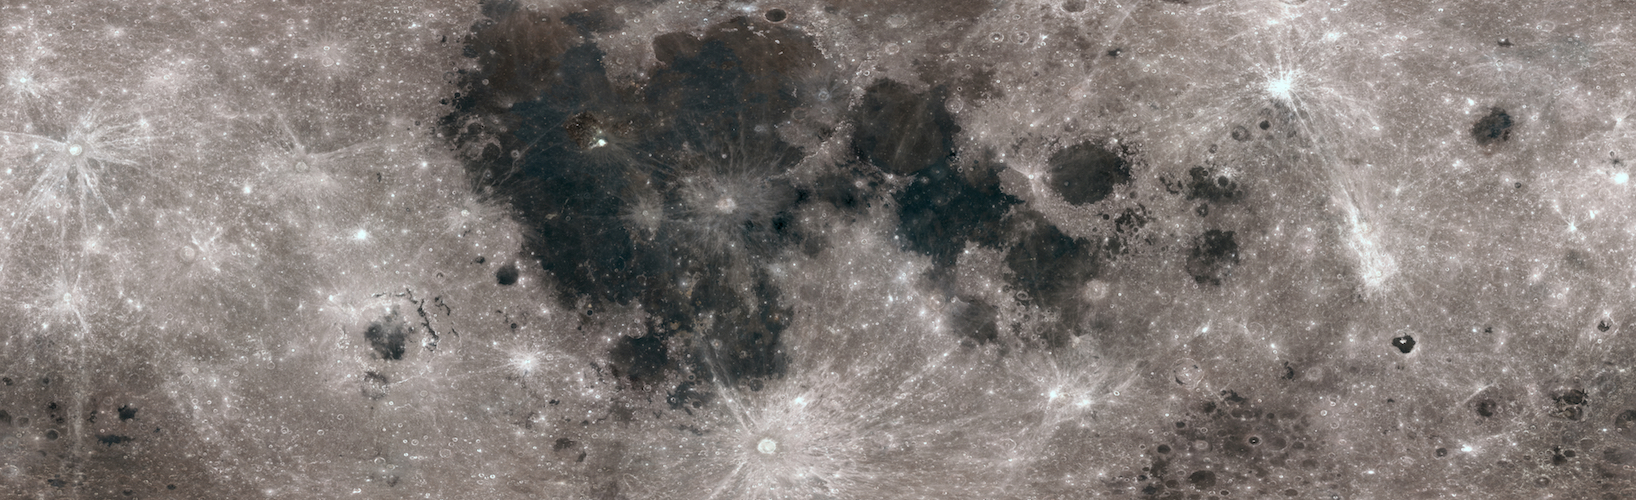 flat projection map of full lunar surface